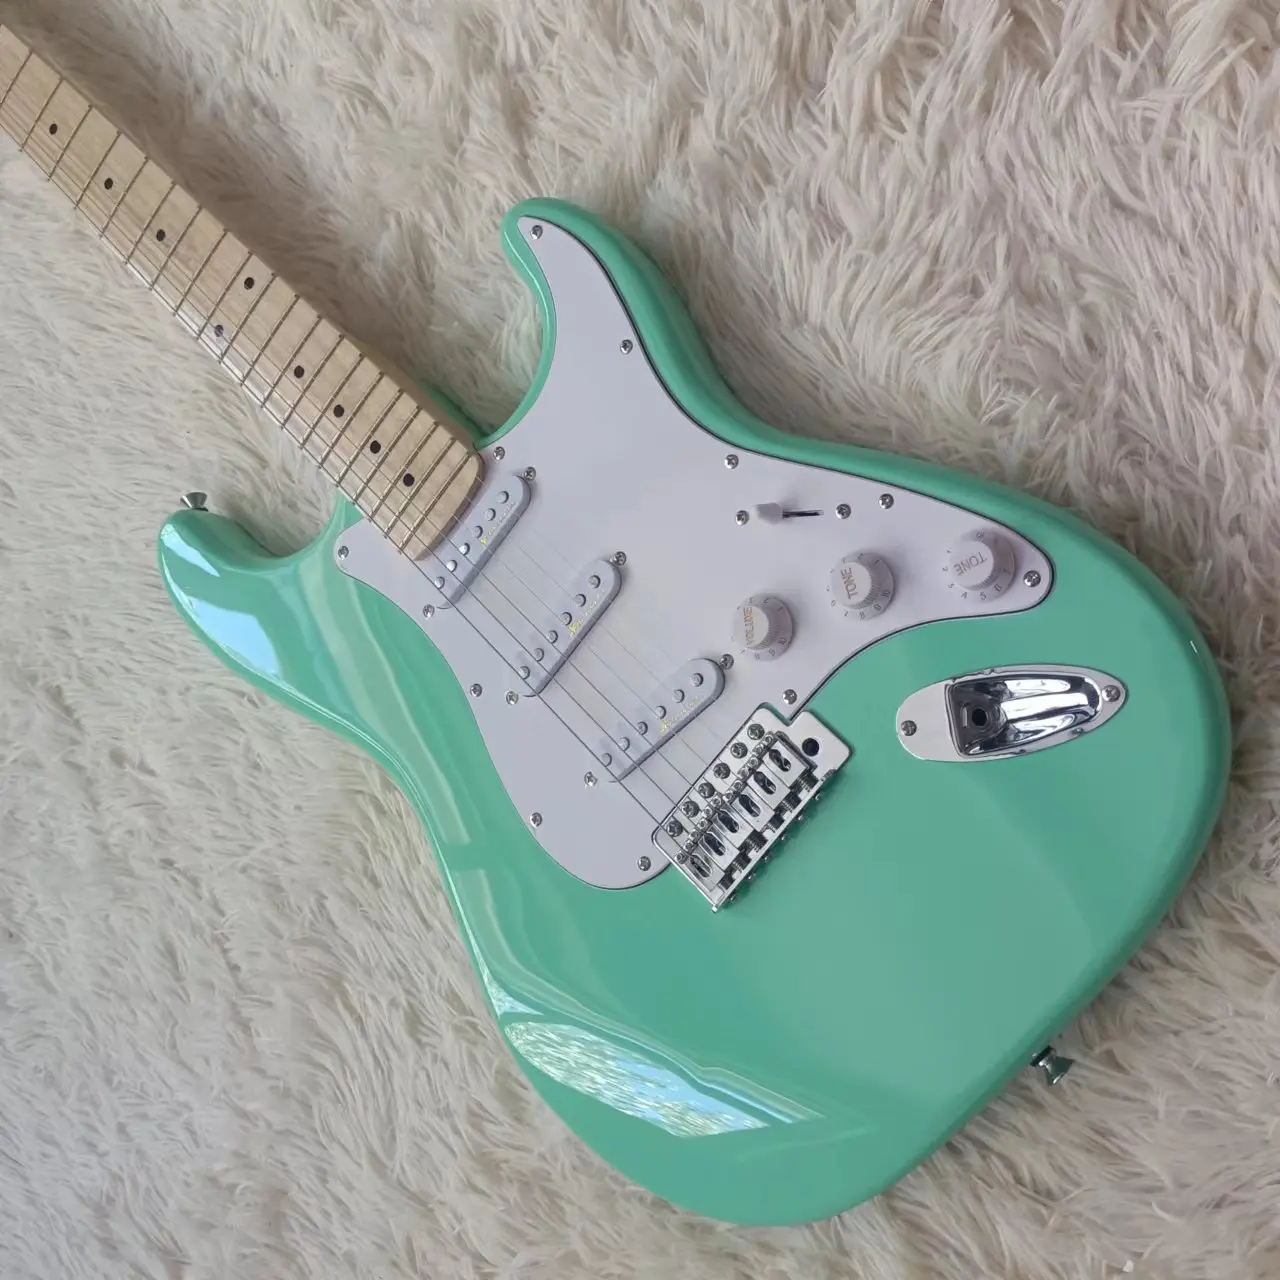 Cables High quality custom body 6 string maple fretboard electric guitar 22 Fret special price surf green